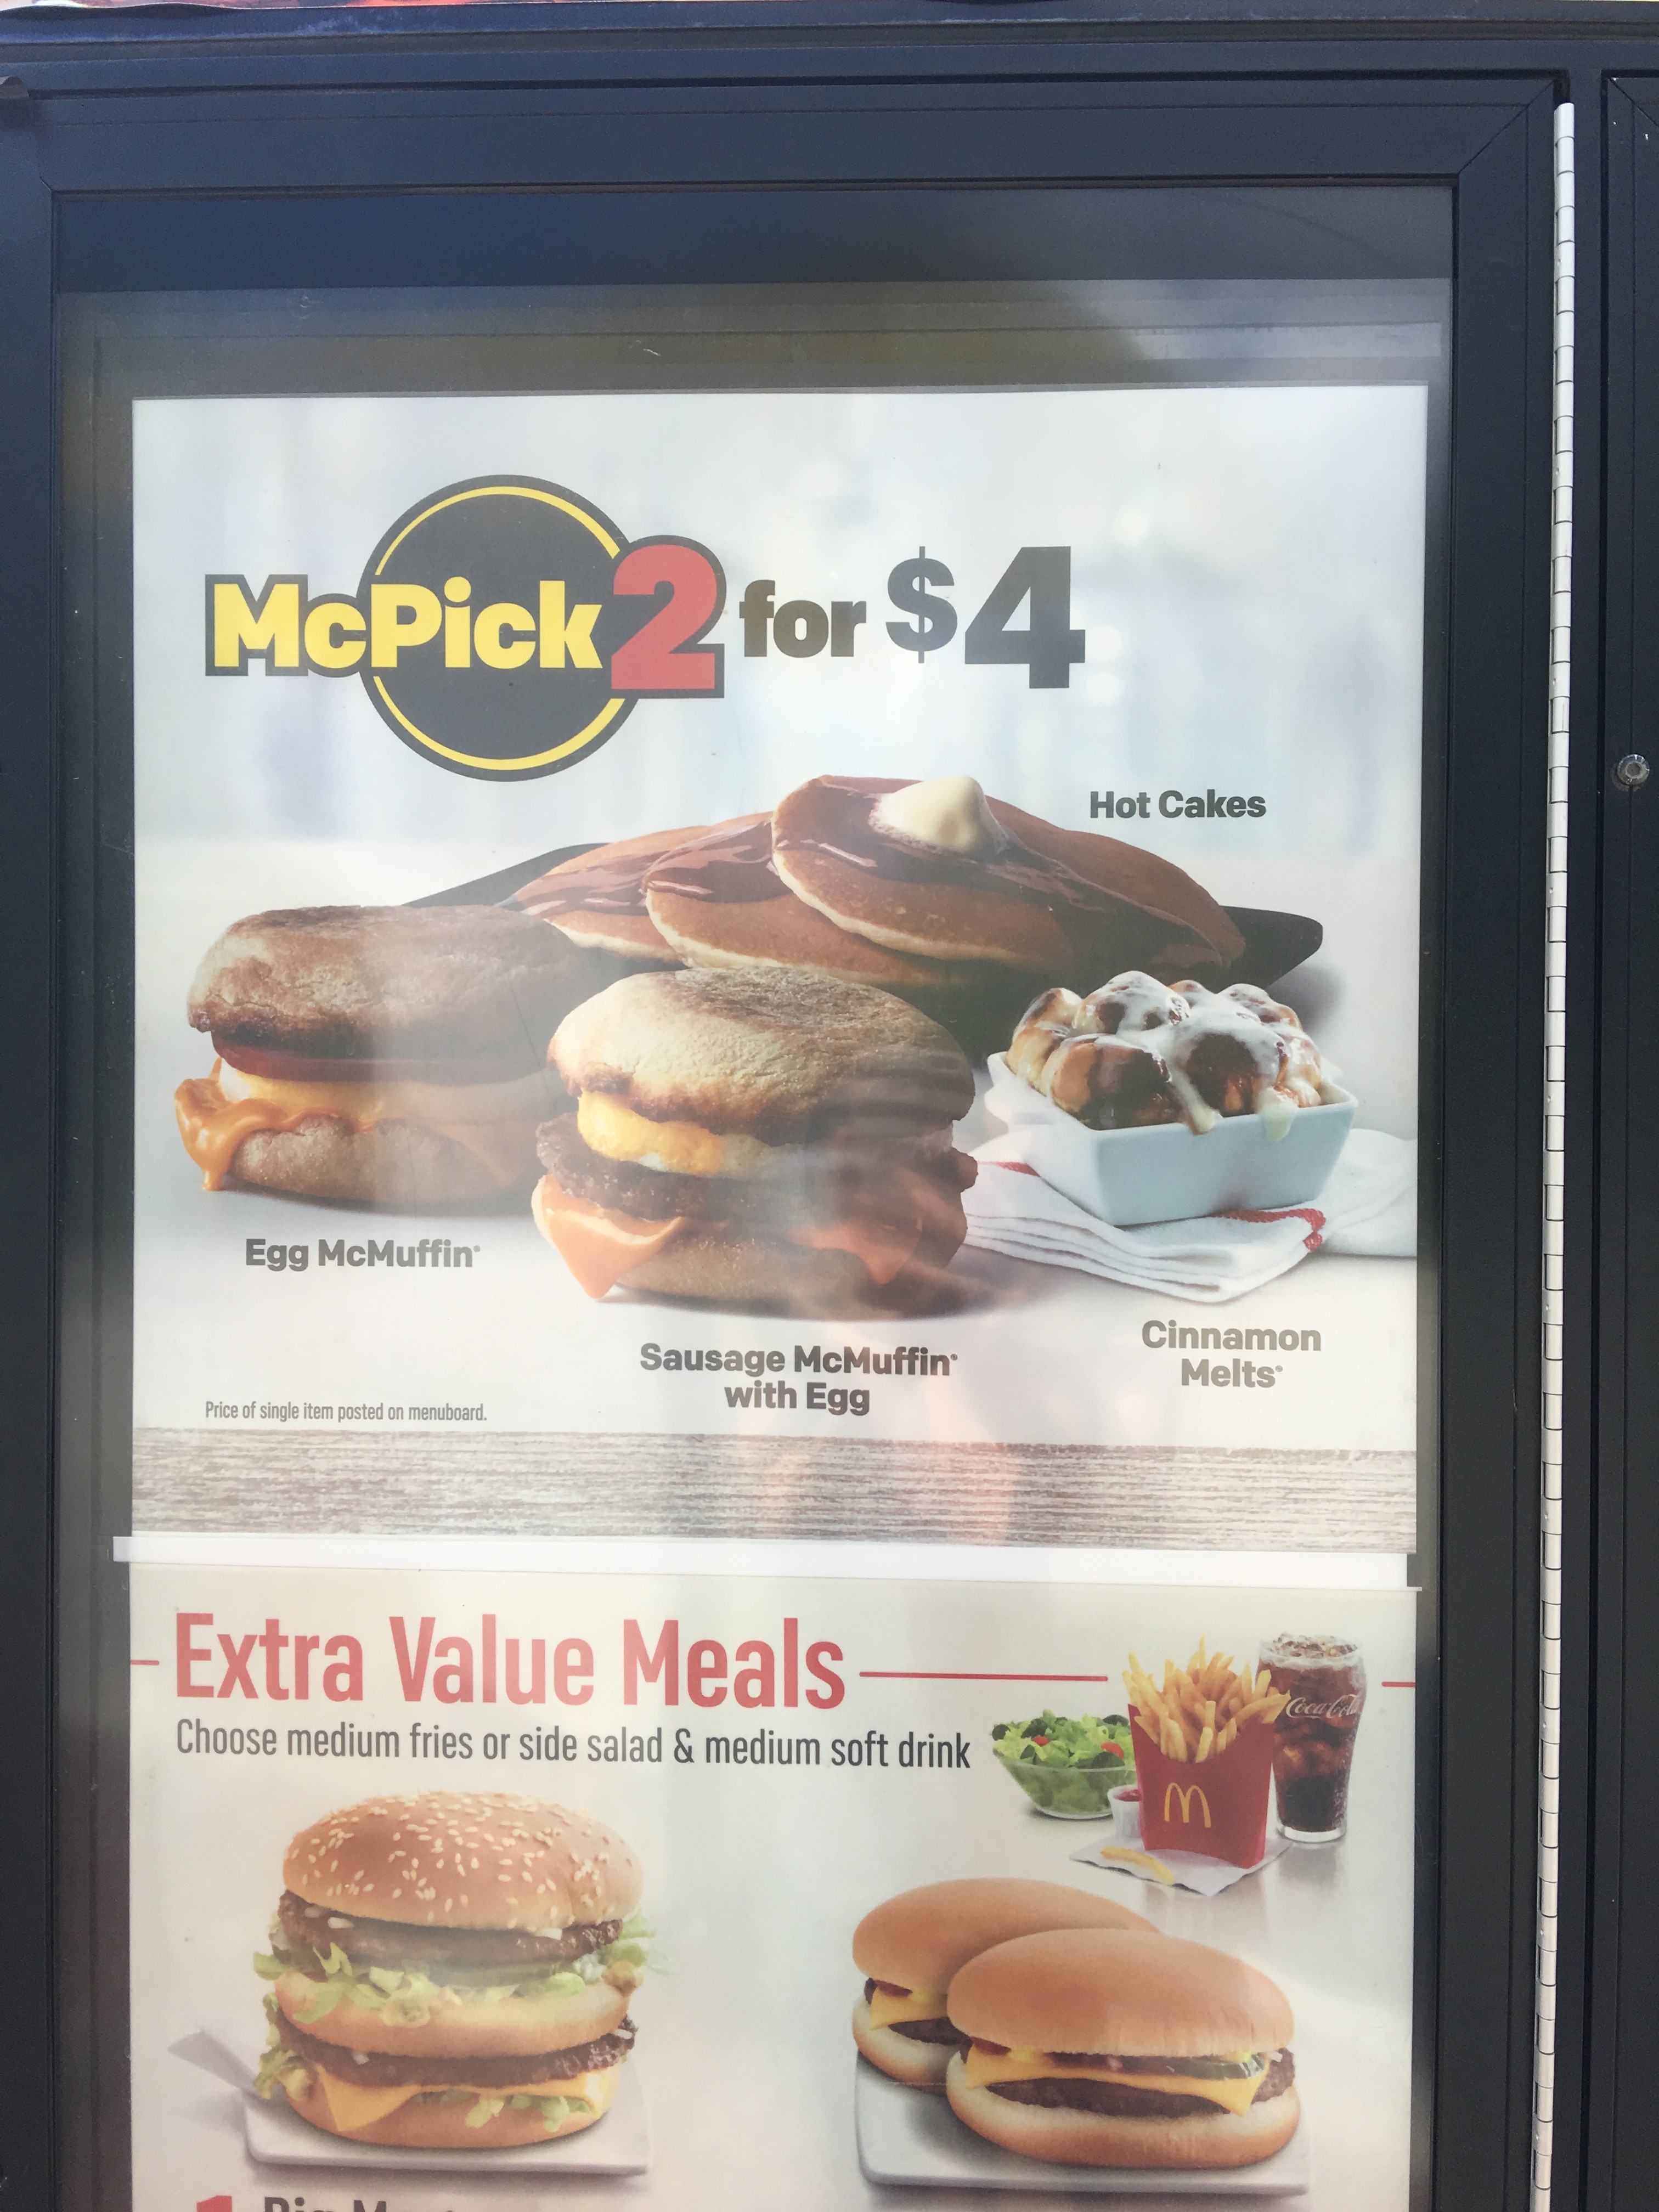 McPick Is Now “2 For $4.” Is The $4 Meal The New Dollar Menu?